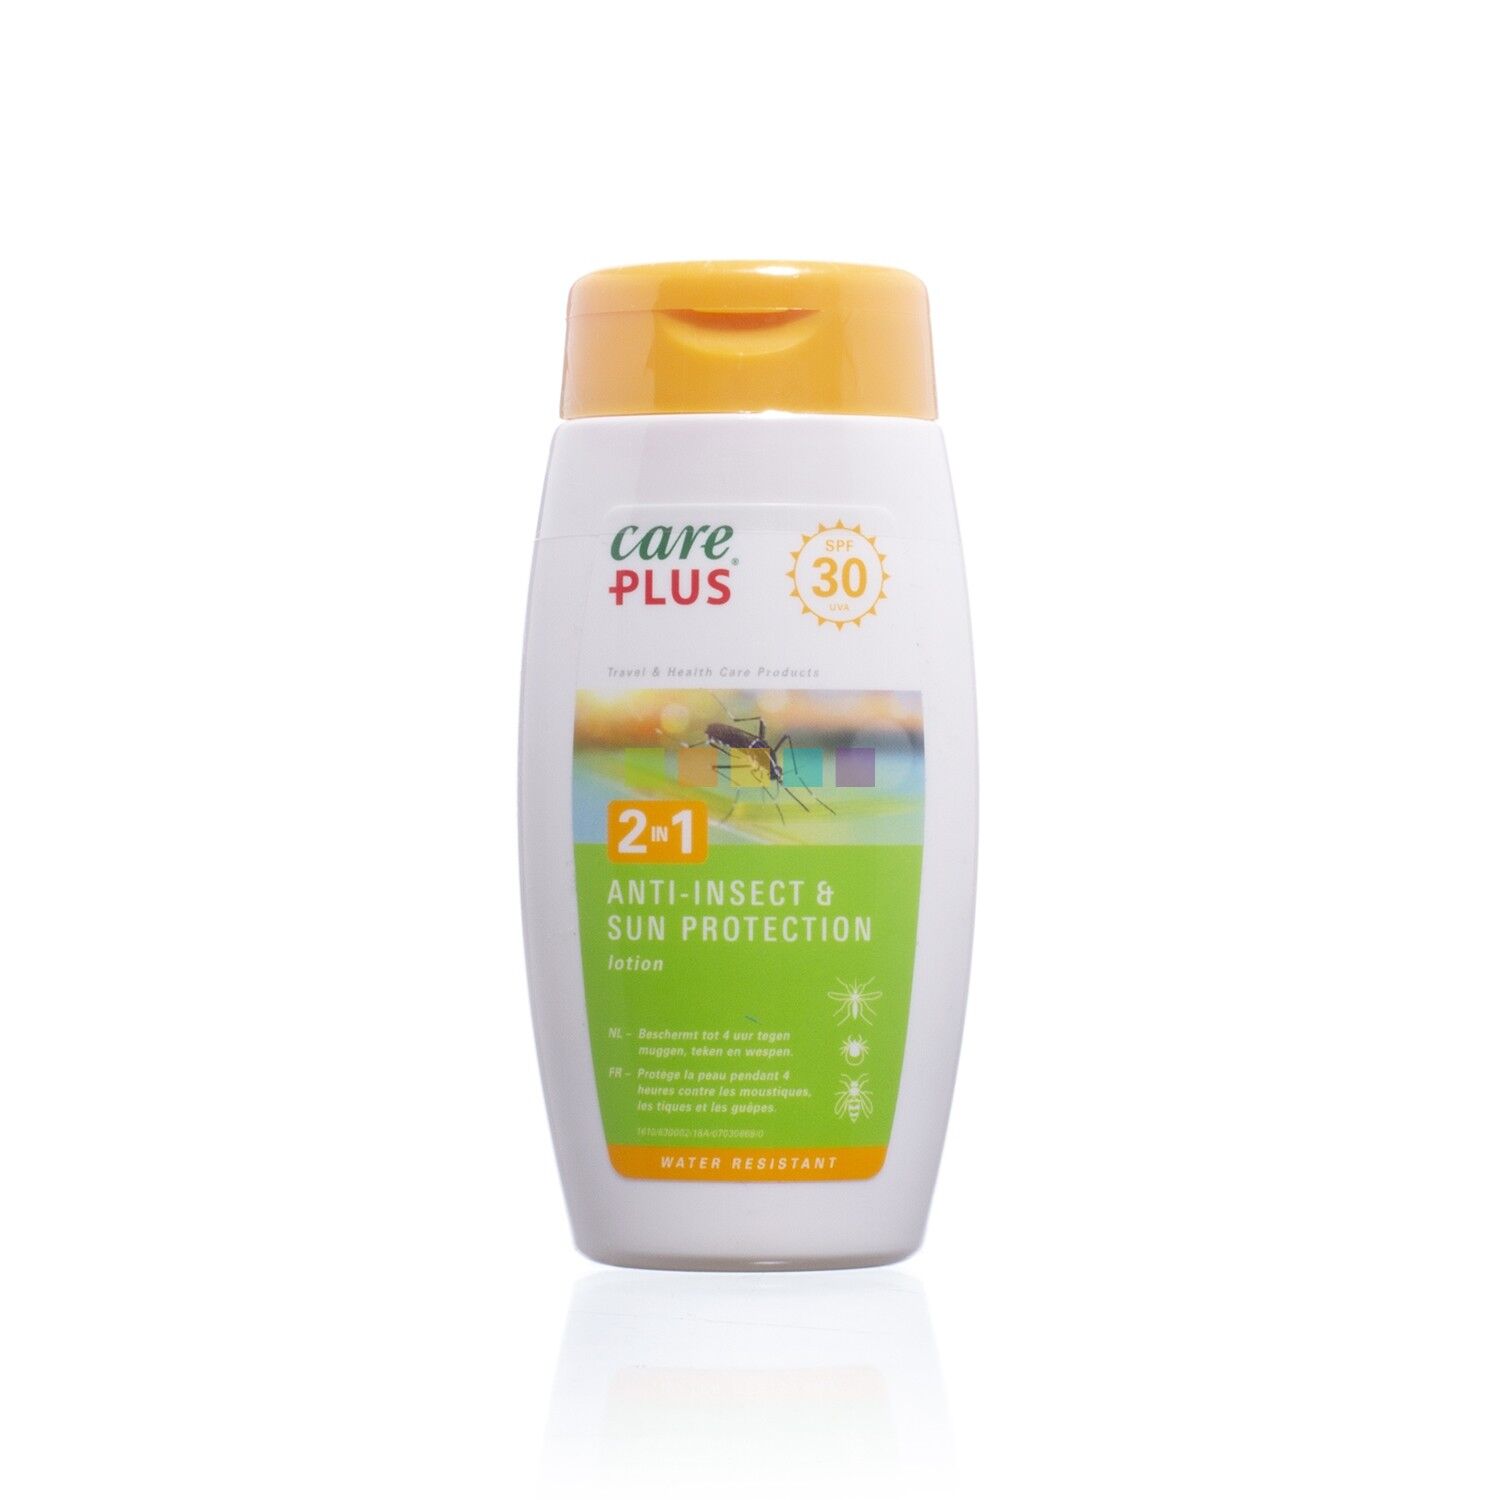 Care Plus 2in1 Anti-Insect & Sun Protection Lotion SPF30 - Insect repellent